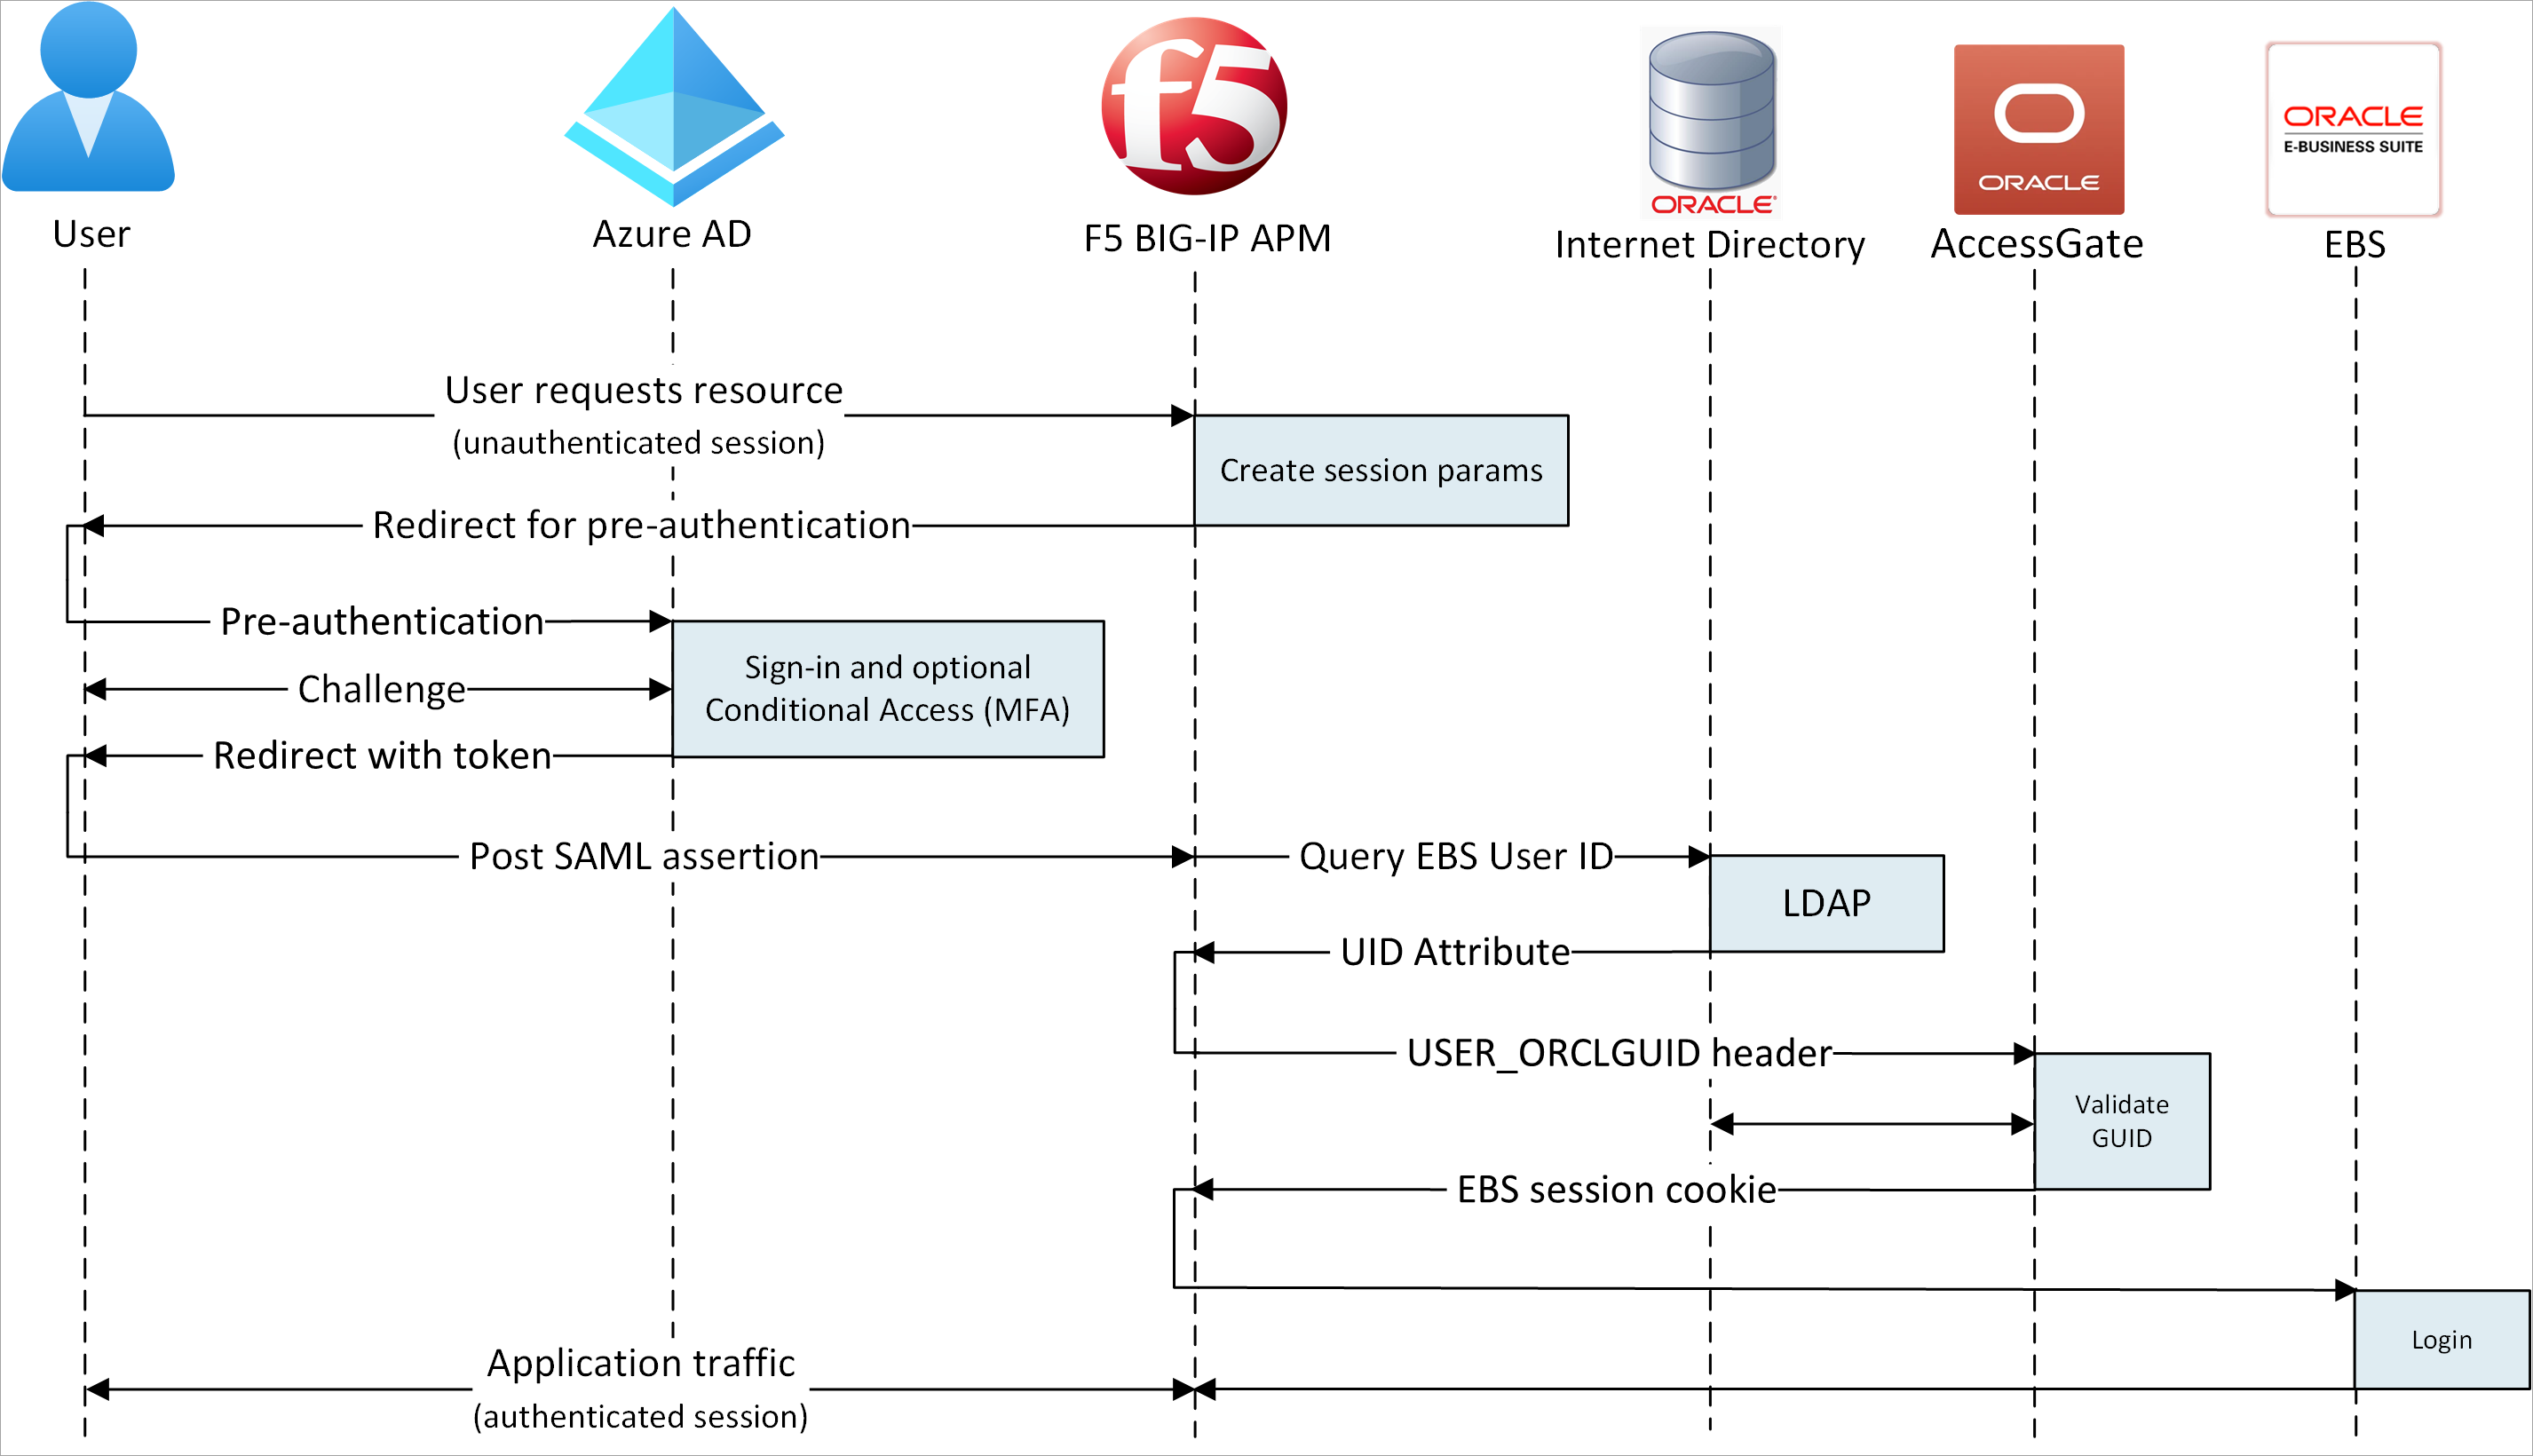 Secure hybrid access - SP initiated flow